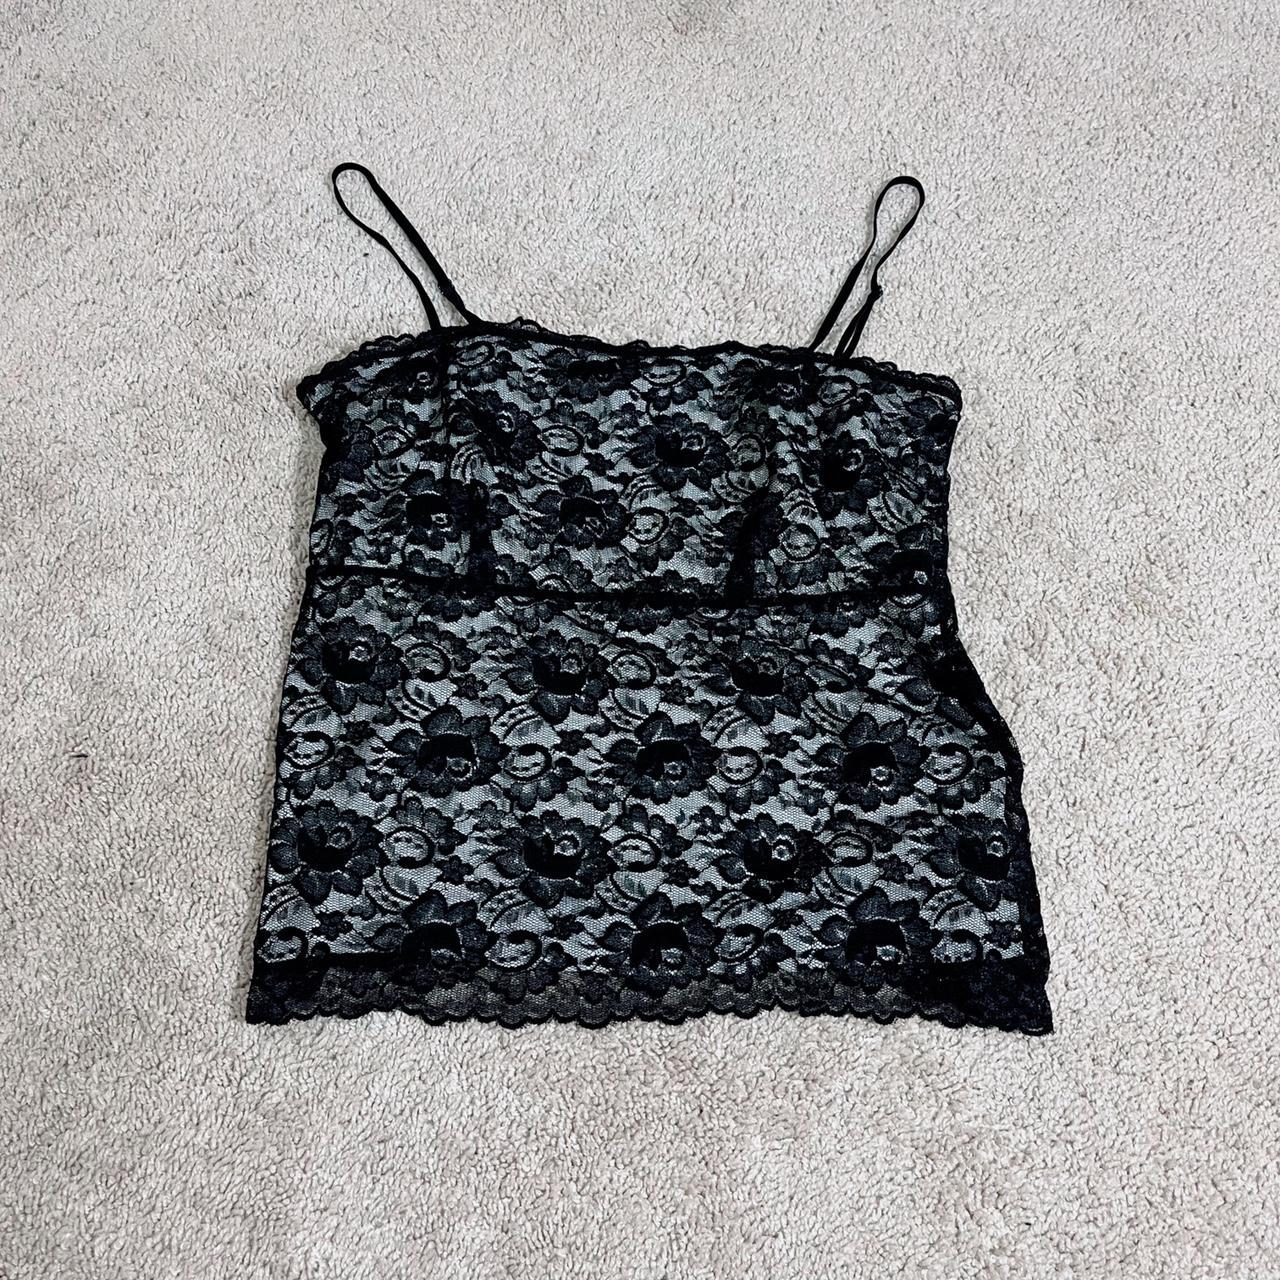 Y2K Lace Cami Top Size Large Made in the... - Depop